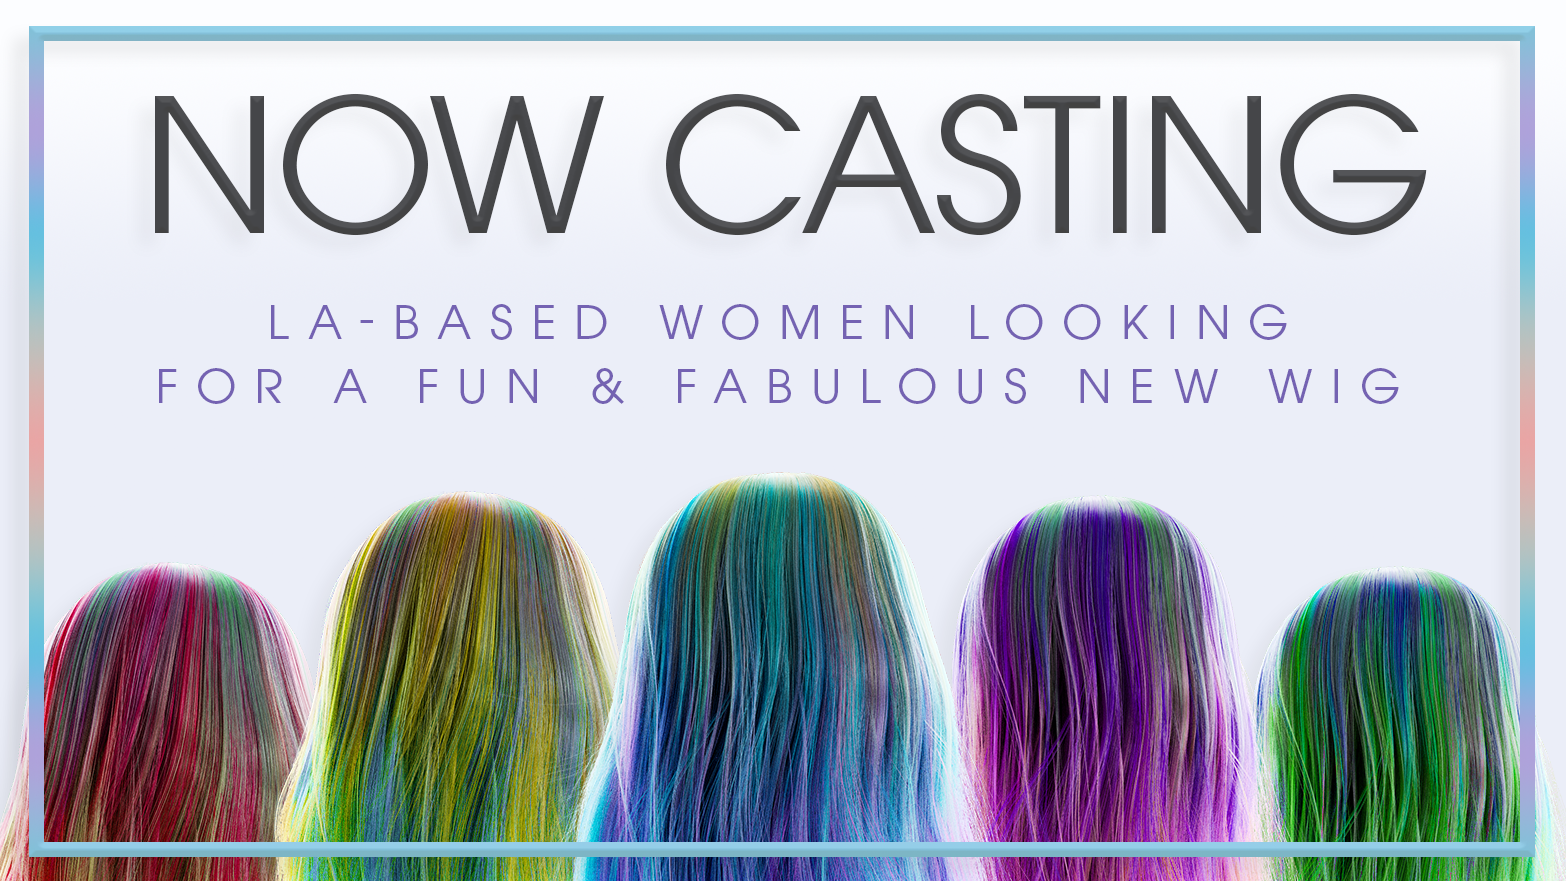 Now Casting LA-Based Women Looking For a Fun & Fabulous New Wig